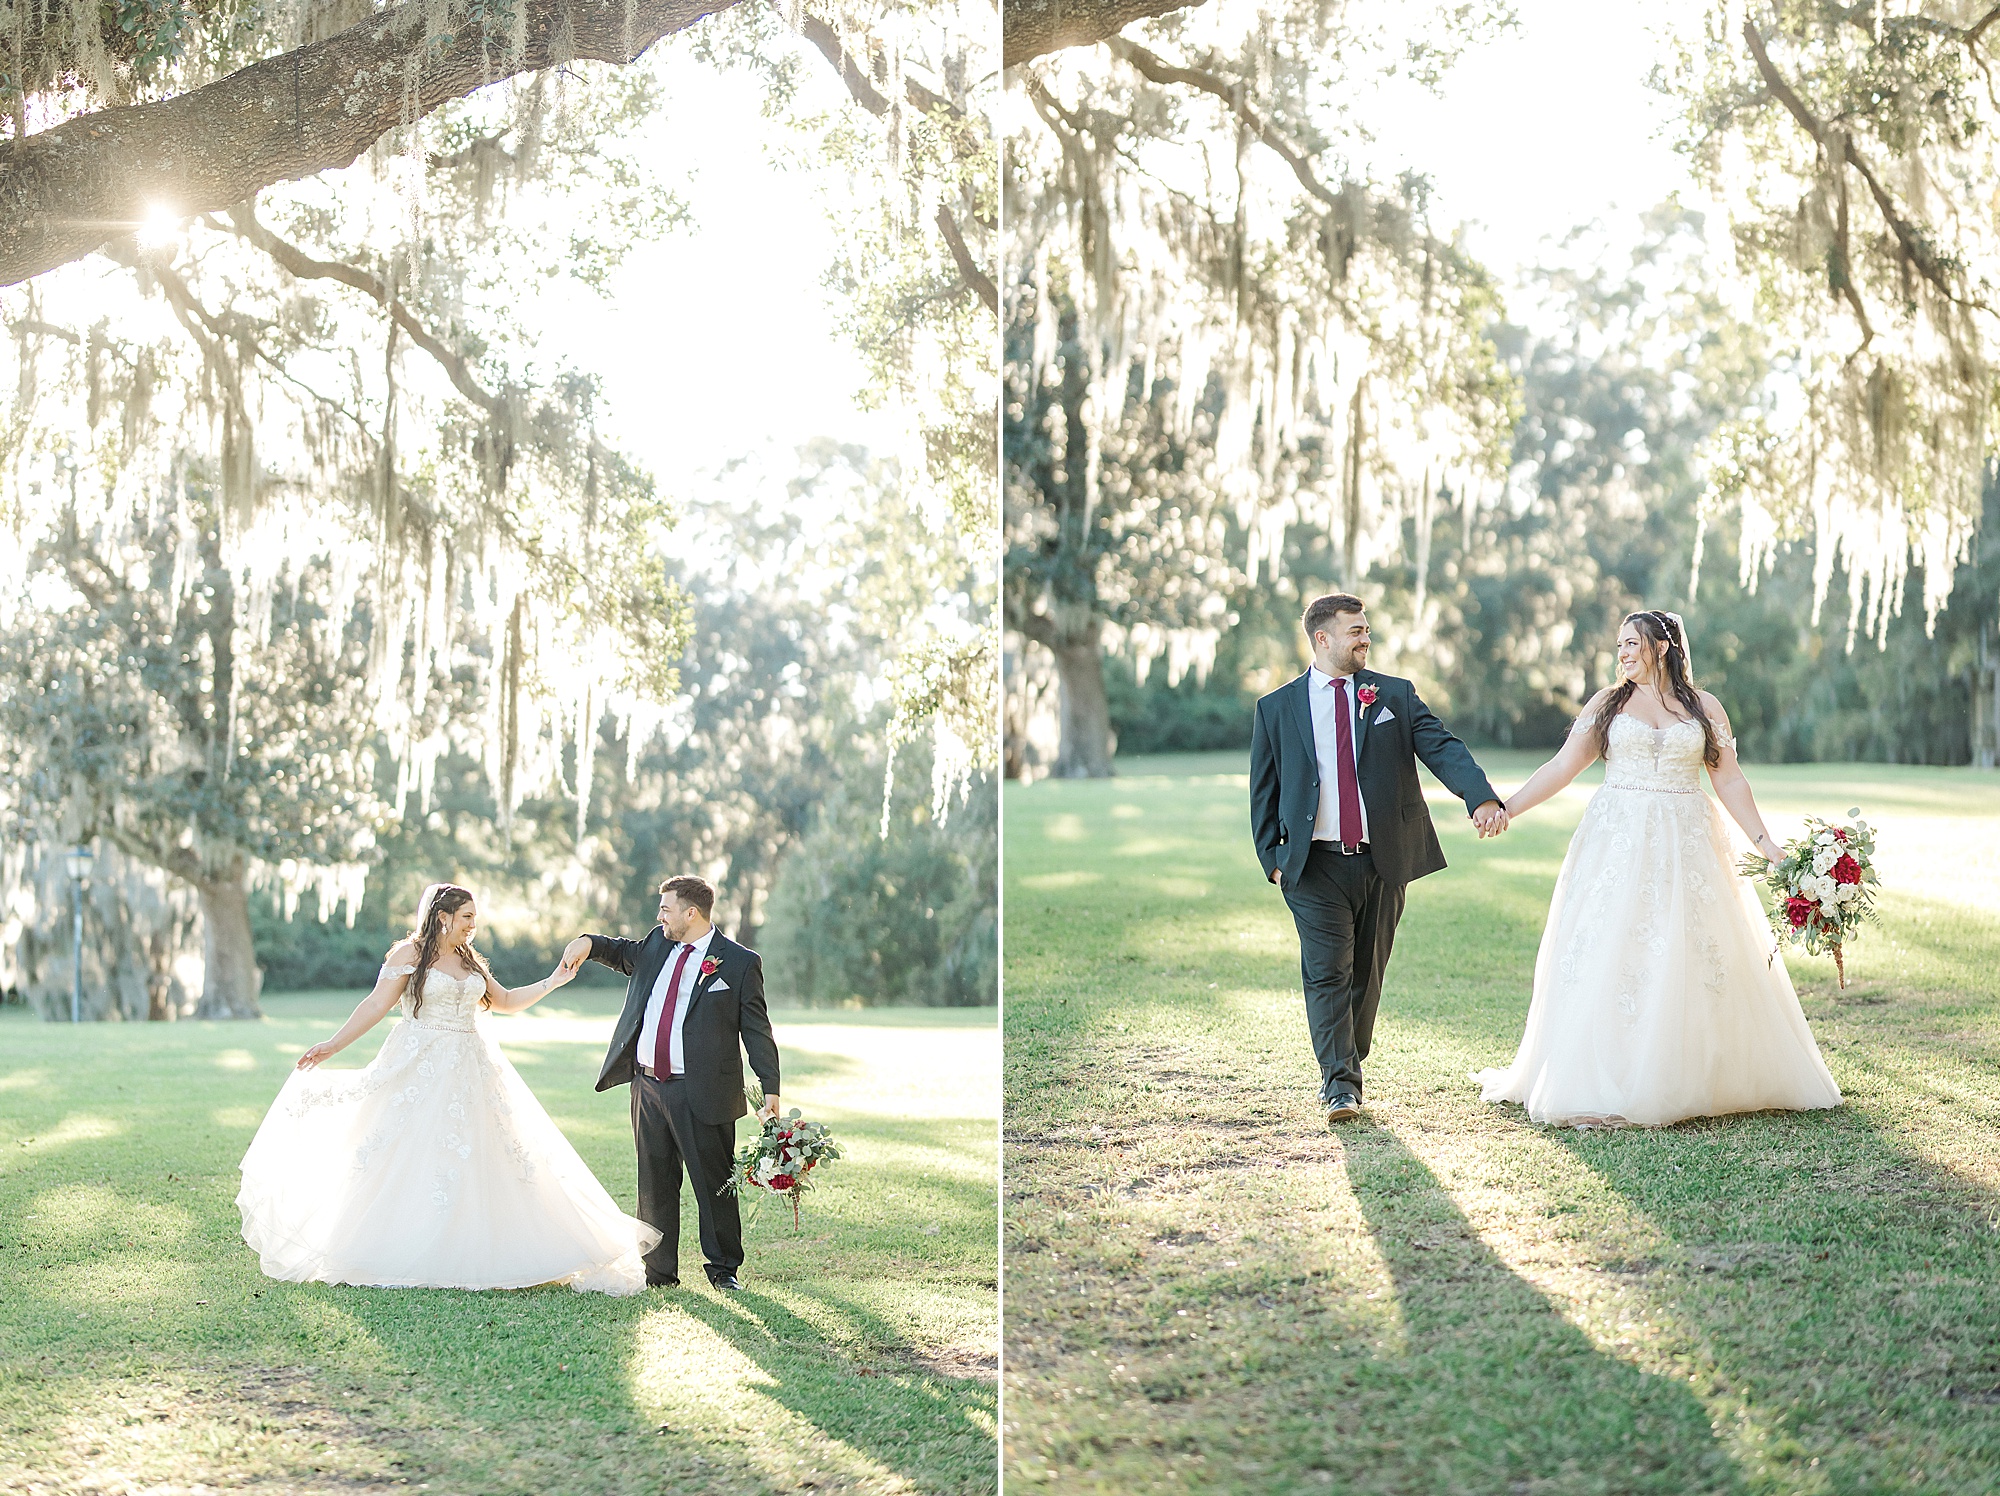 couple hold hands and walk together under oak trees